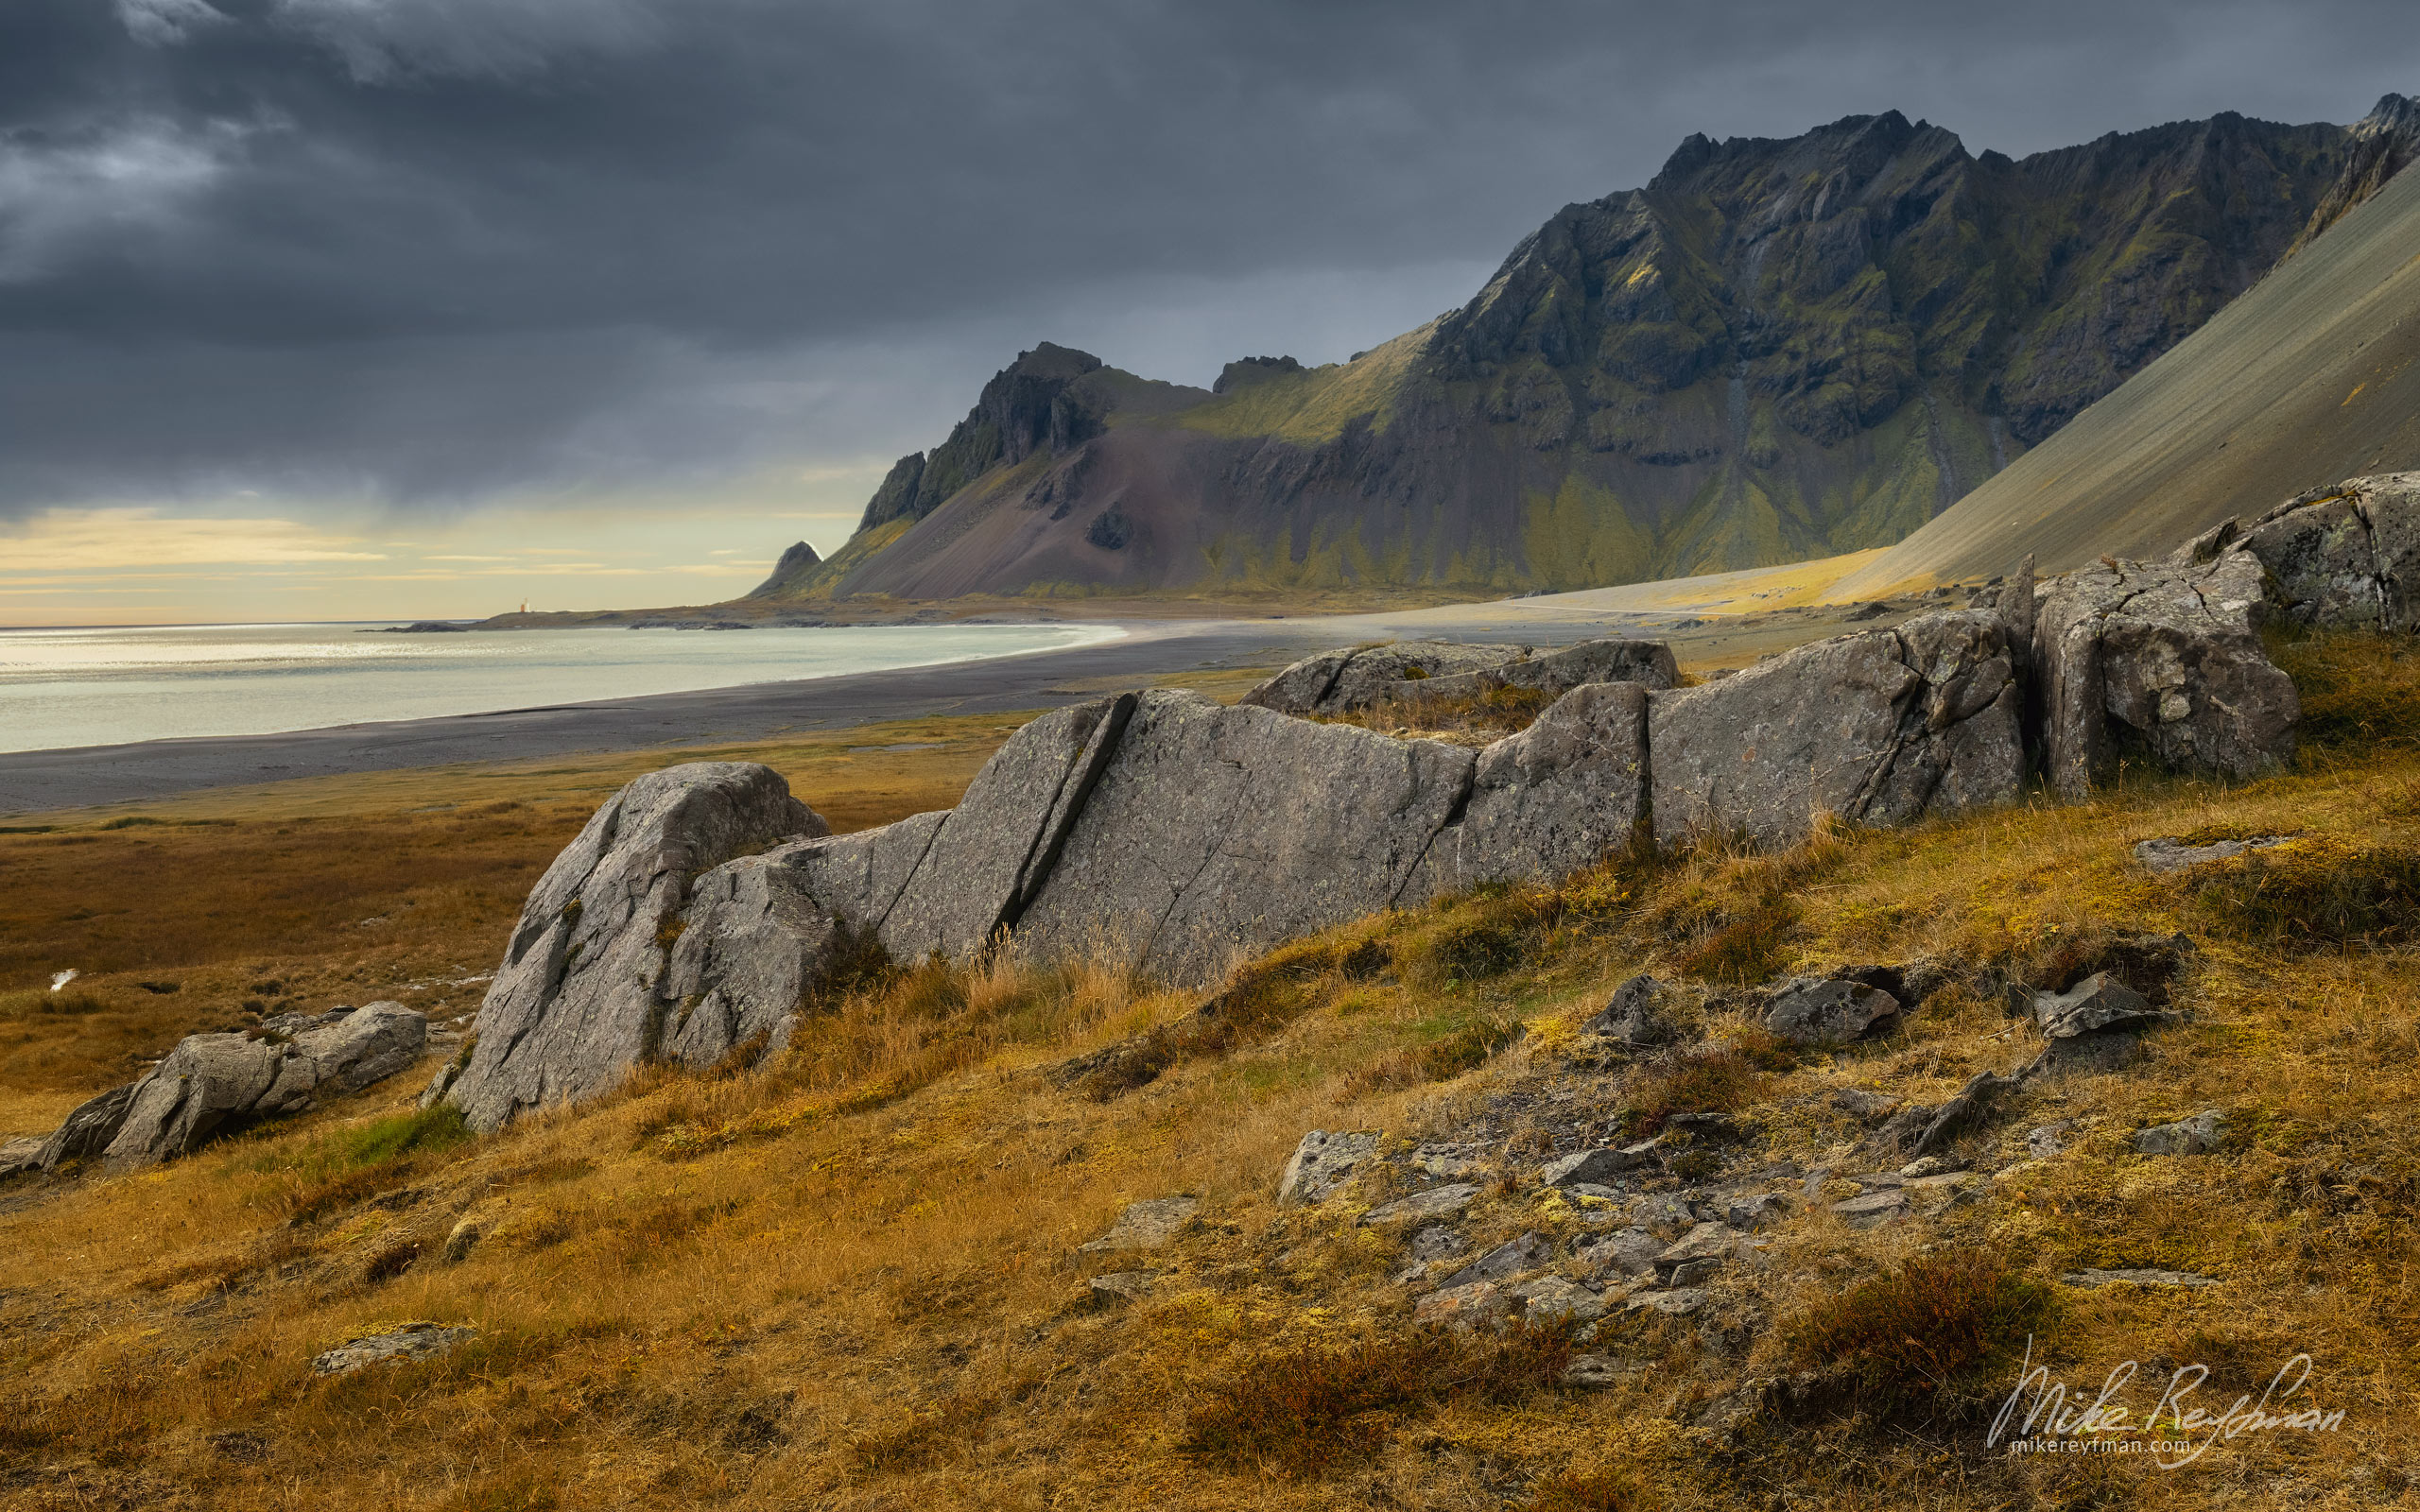 Distant view of Stokksnes Peninsula and Vestrahorn Massif from The Ring Road (Route 1), Iceland. 046-IC-CL_50B9811 - Where Lava Meets the Ocean. Iceland coastline. - Mike Reyfman Photography